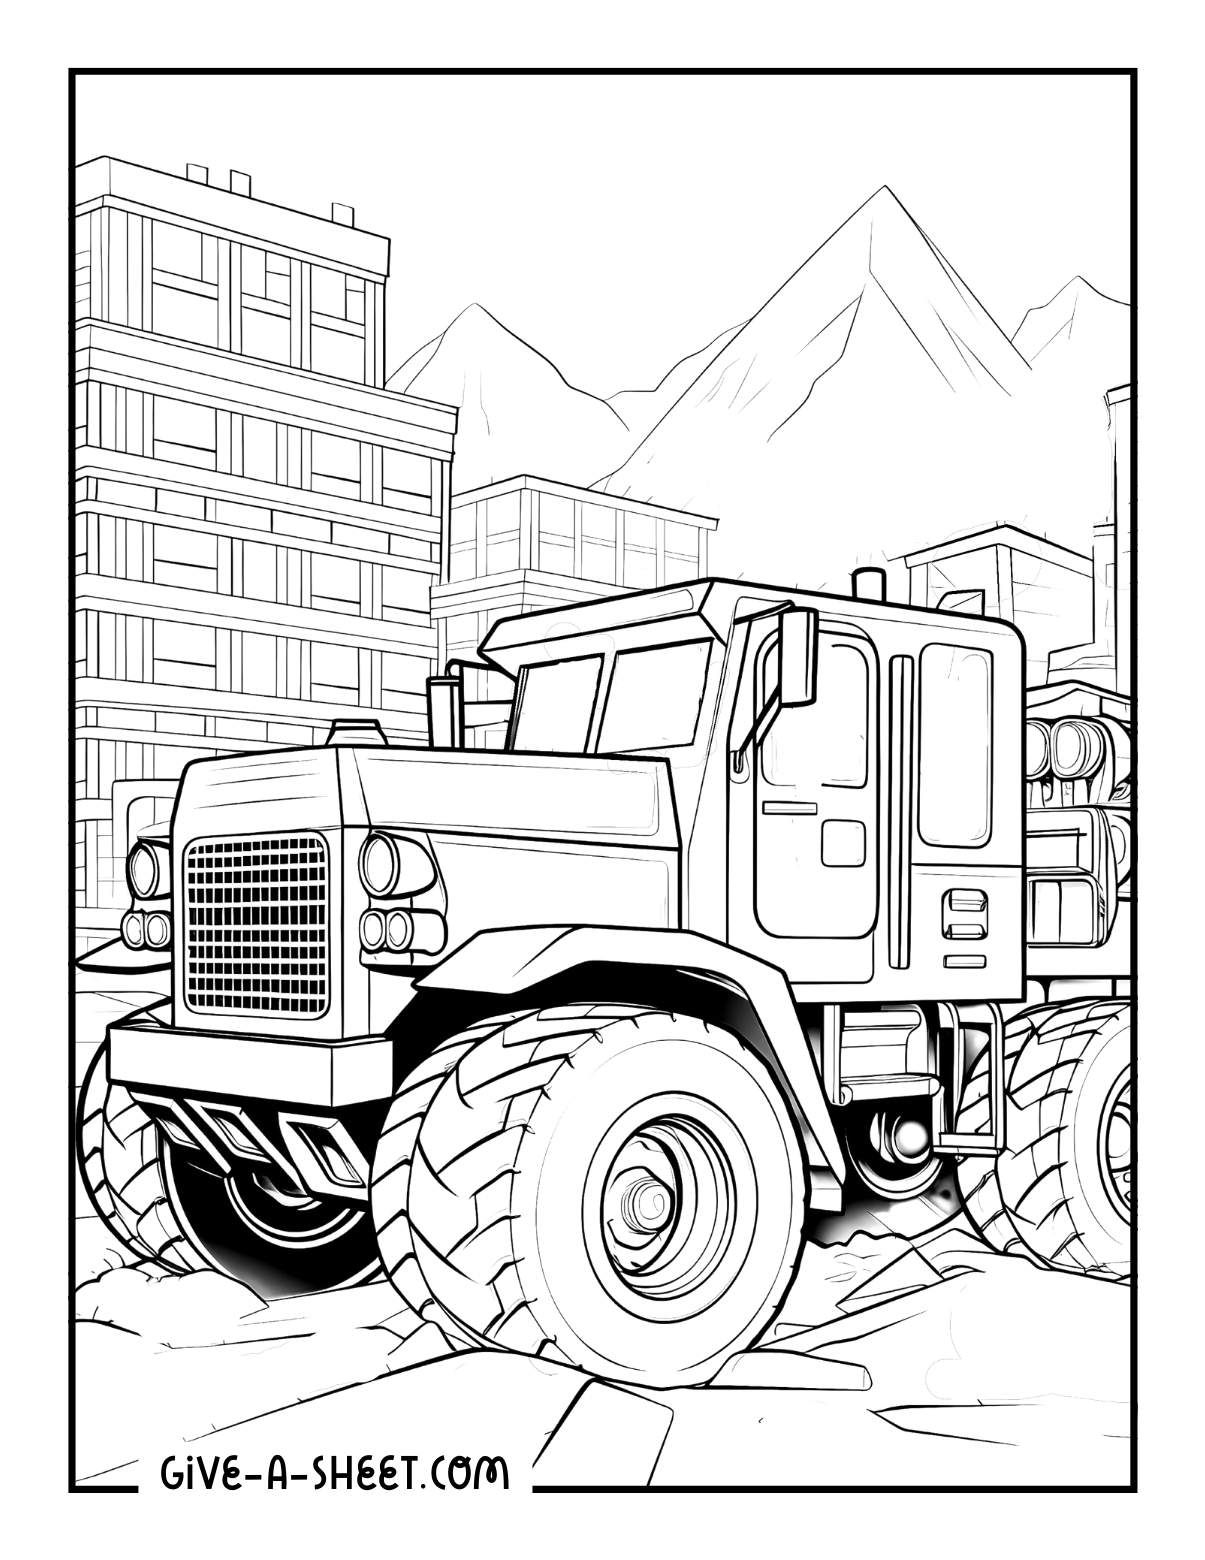 Construction truck coloring page for adults.